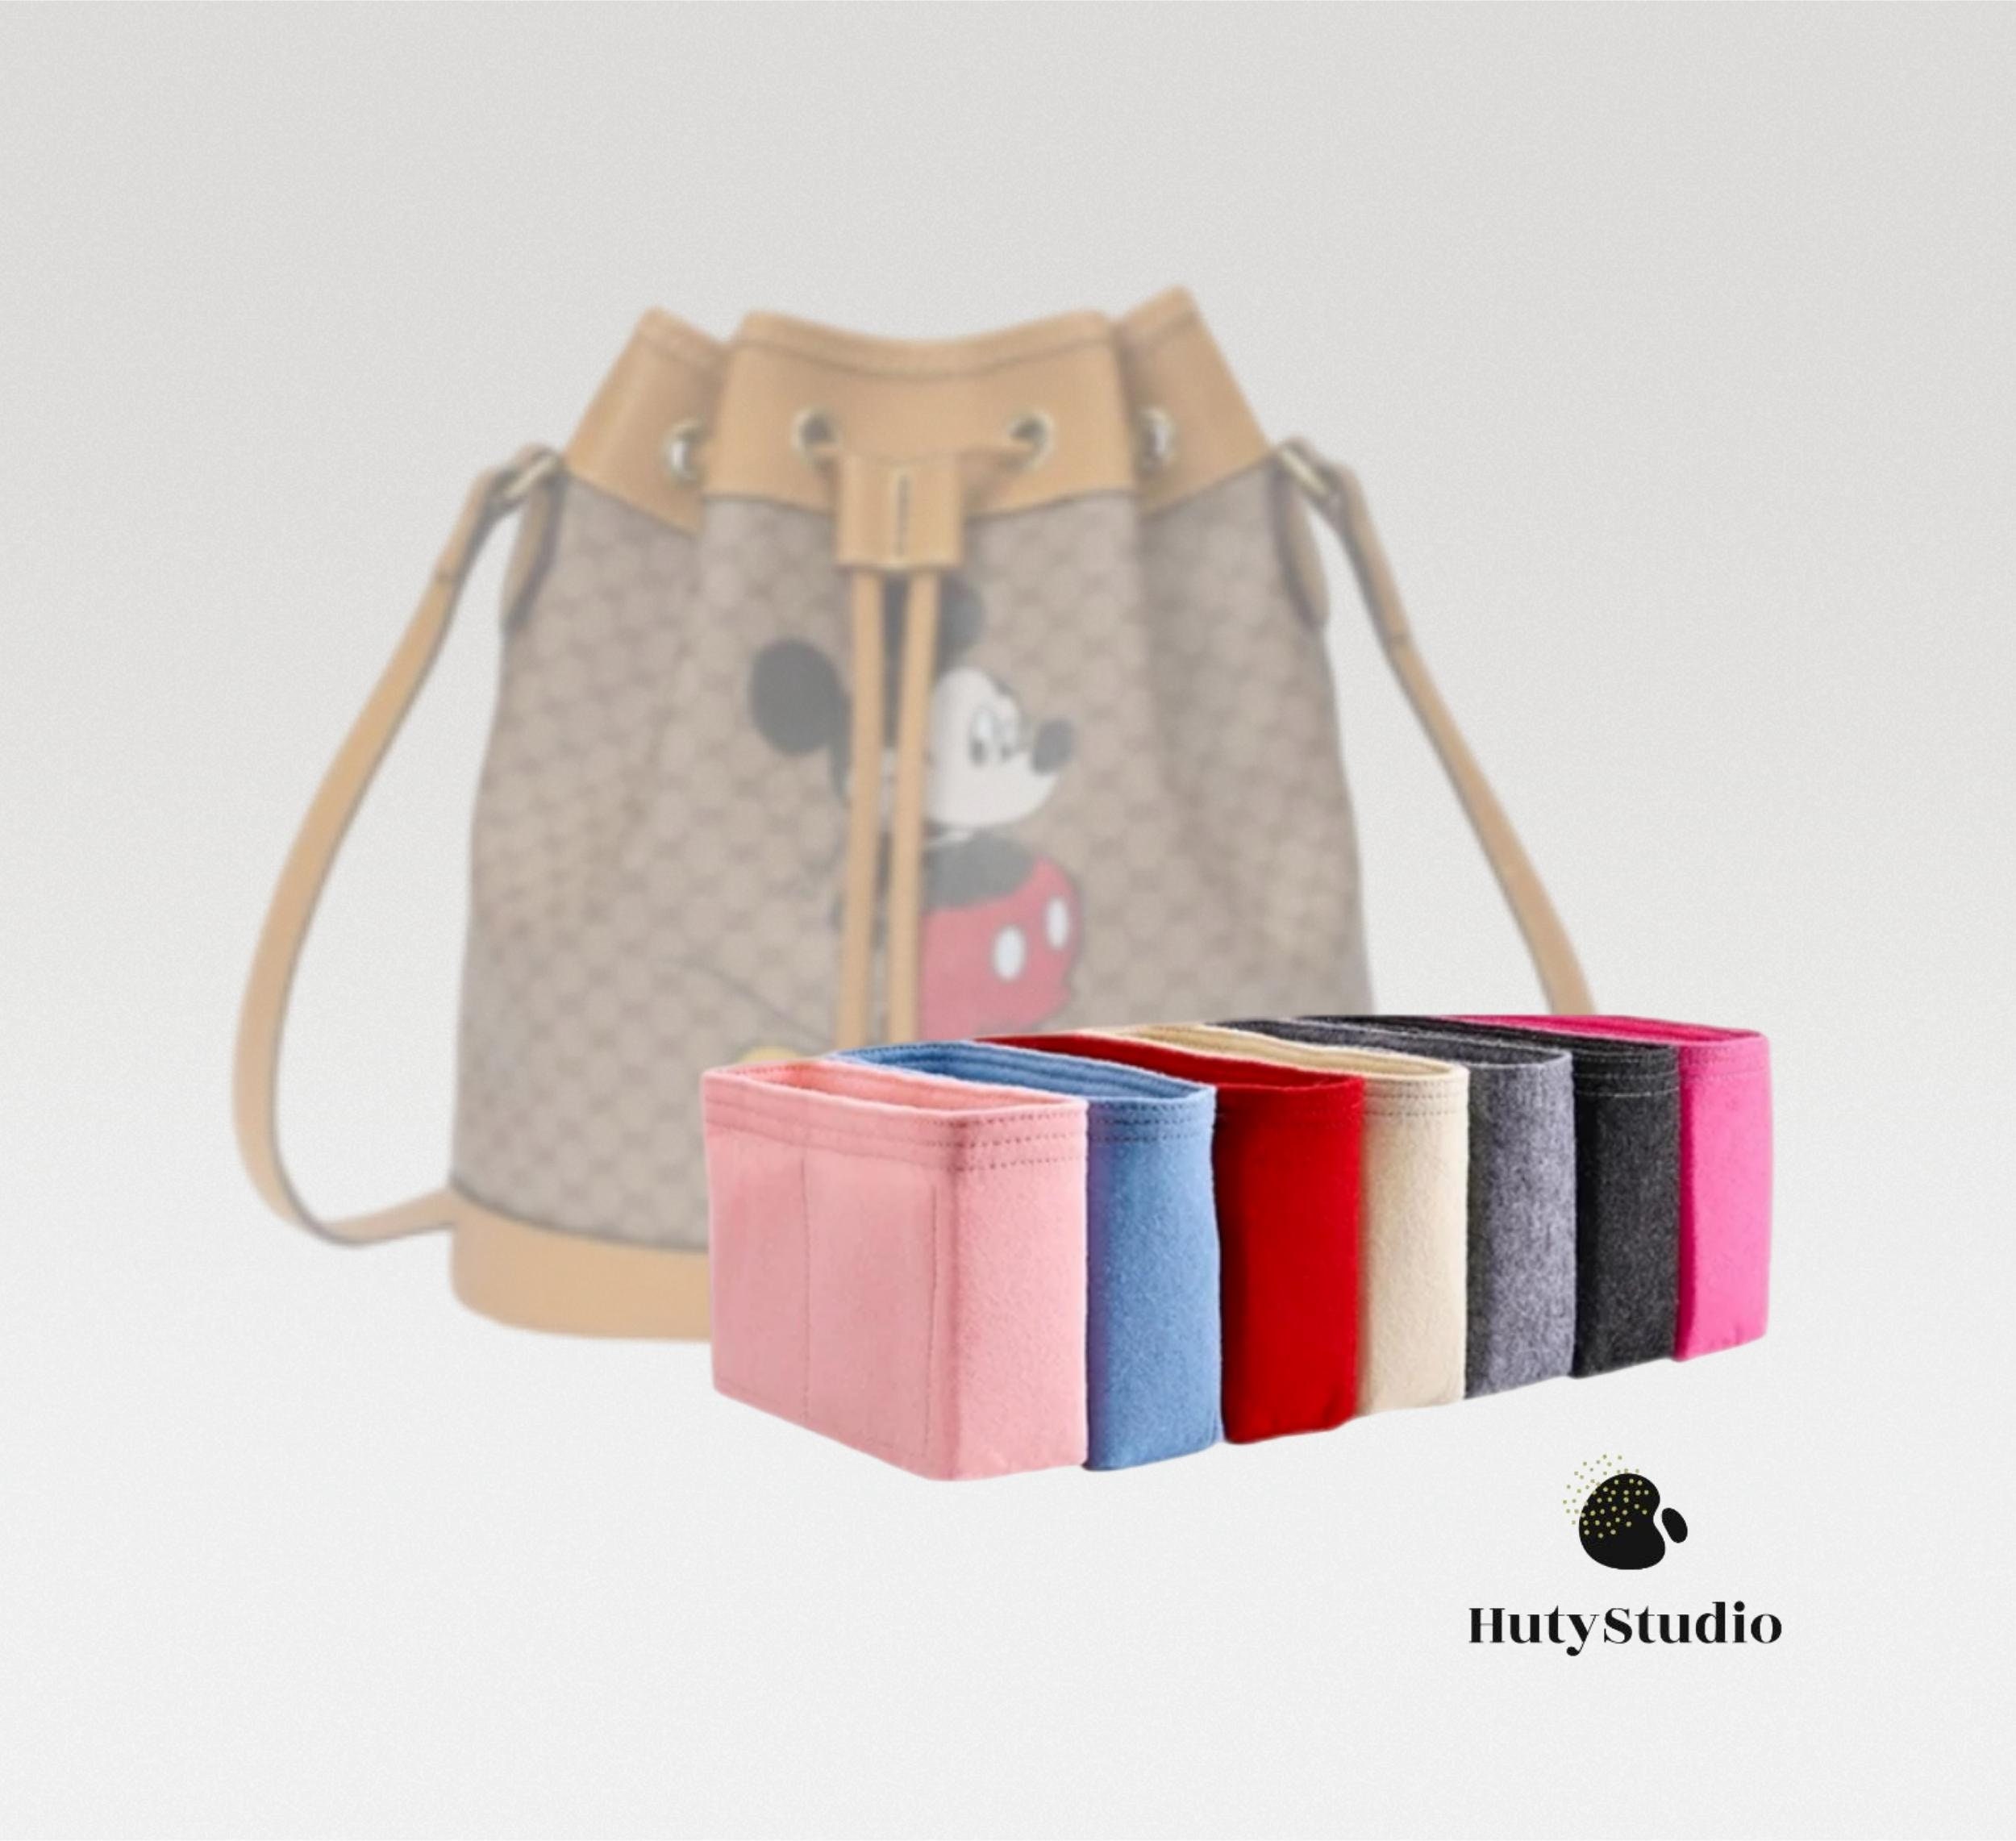 Personalized Gucci Mickey Mouse bathroom shower curtain set - LIMITED  EDITION